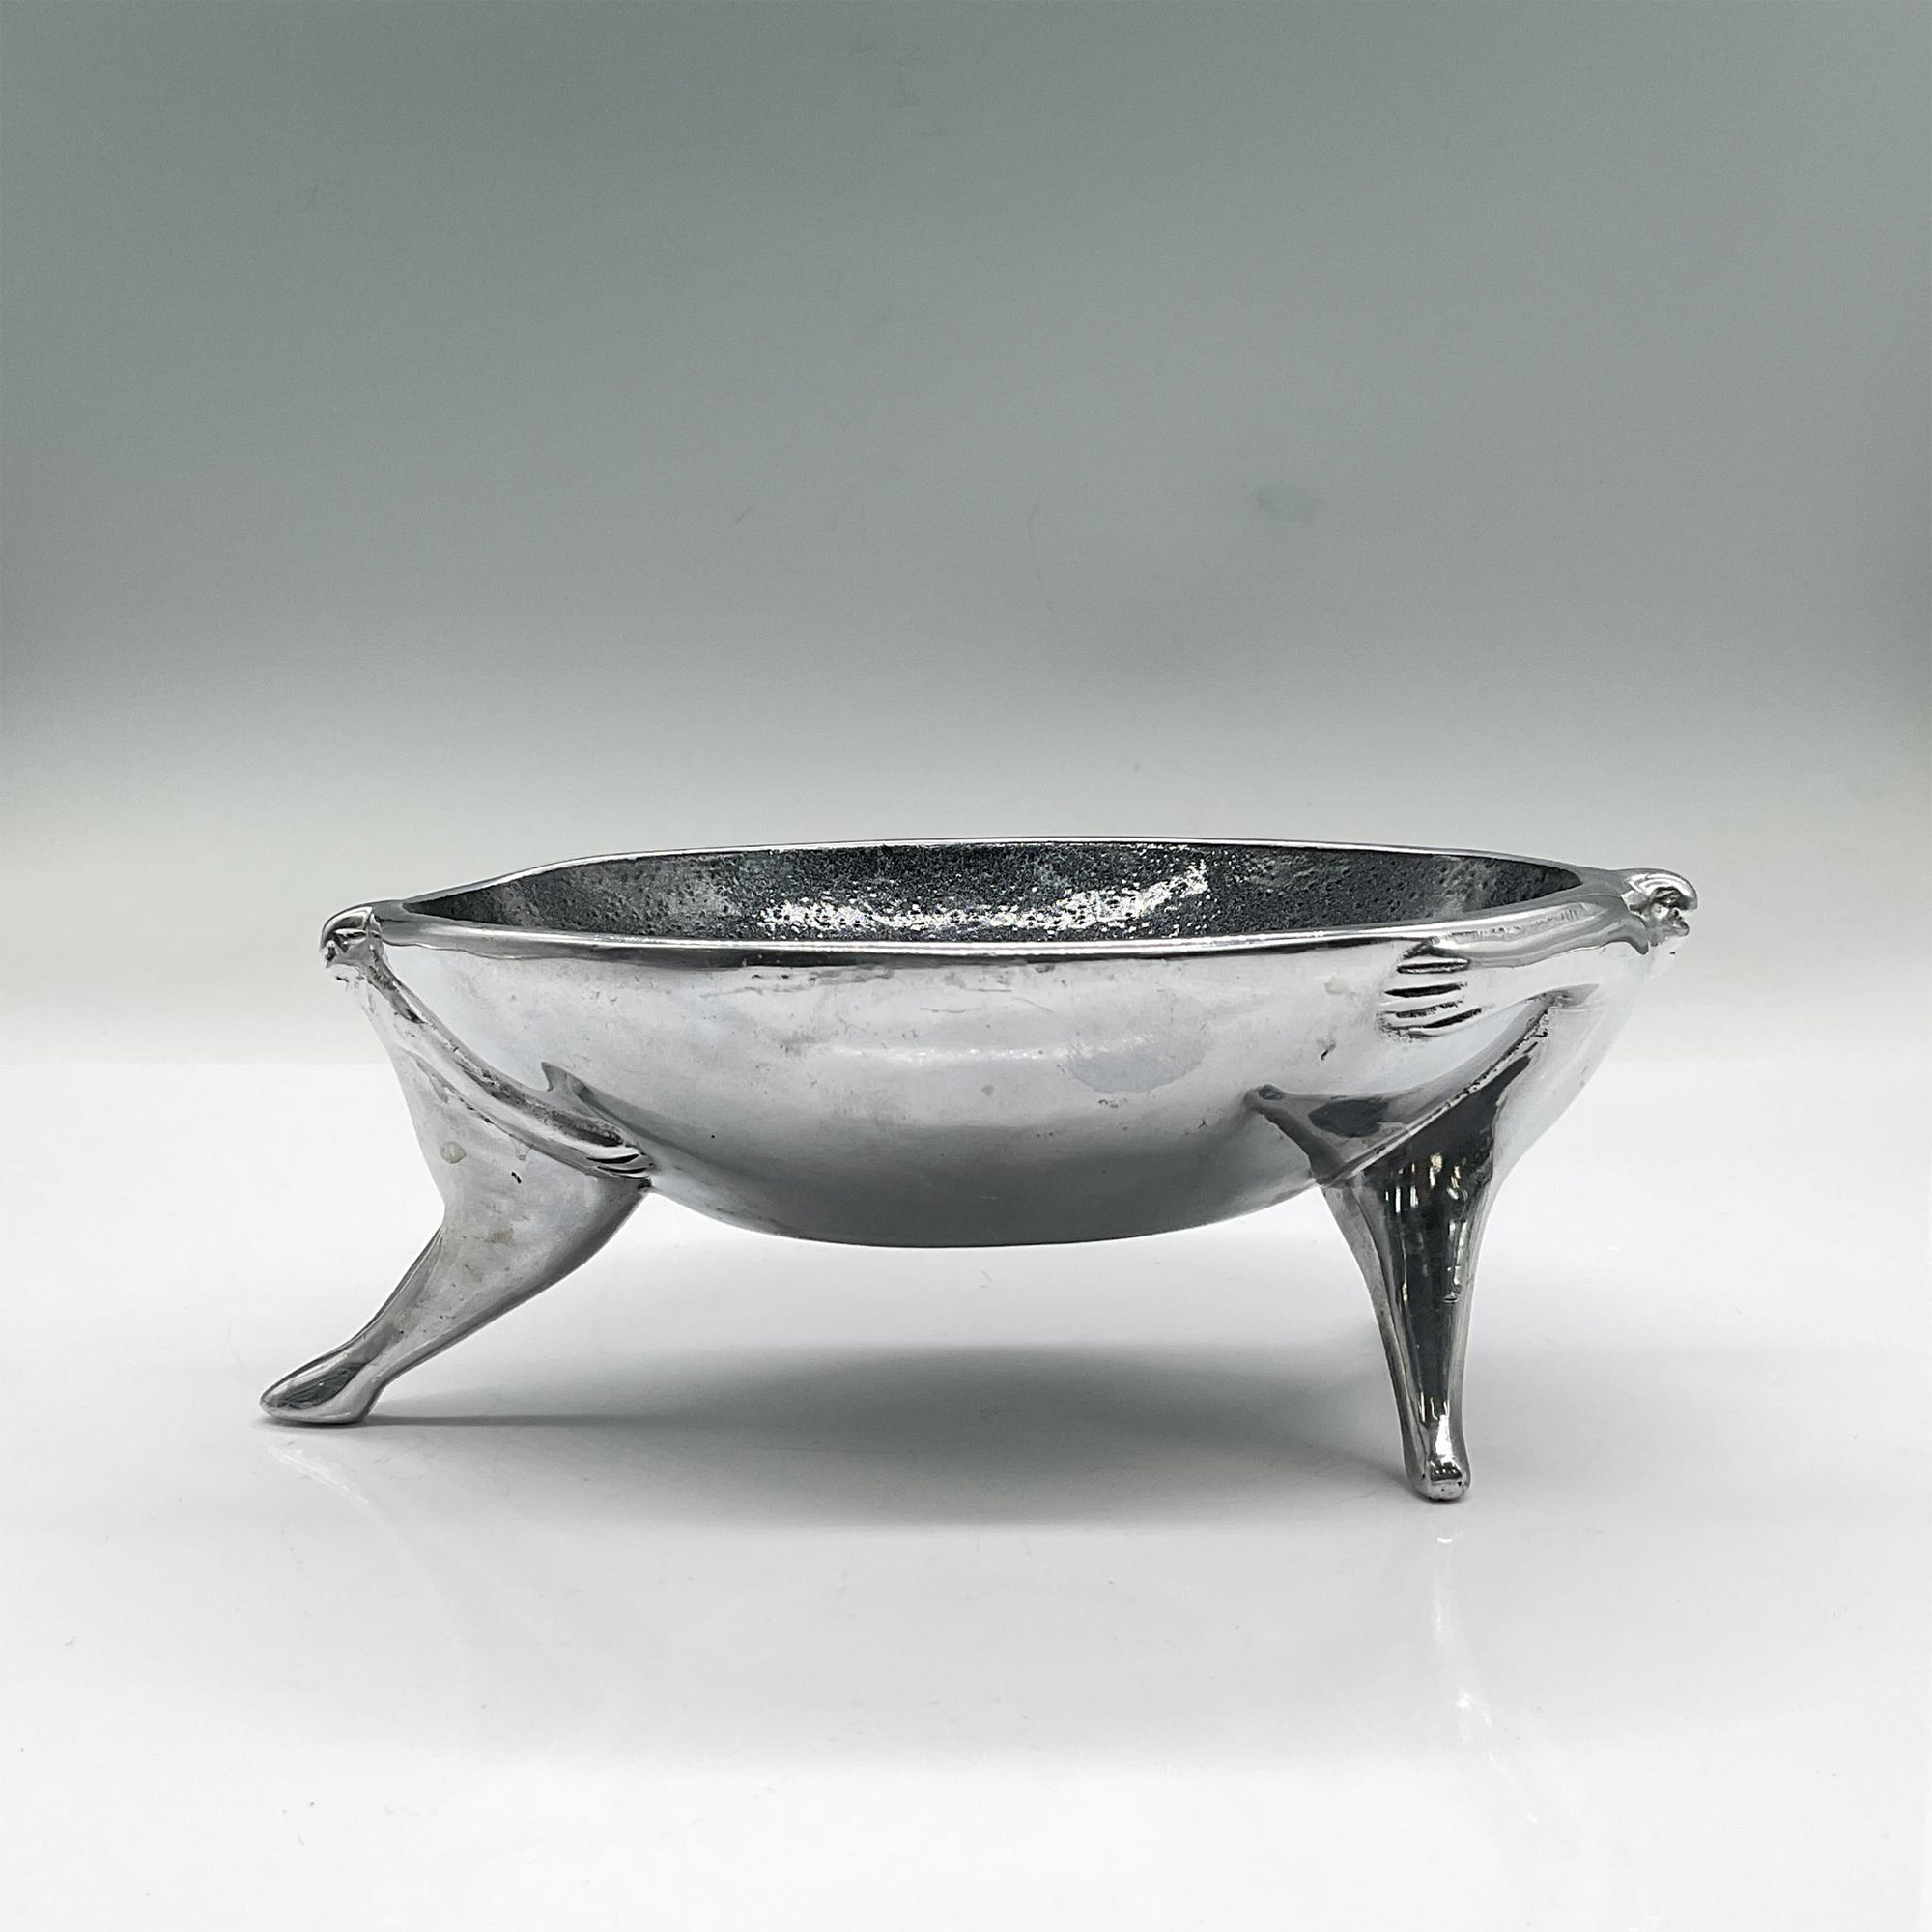 Carrol Boyes Stainless Steel Footed Nut Bowl - Image 3 of 6